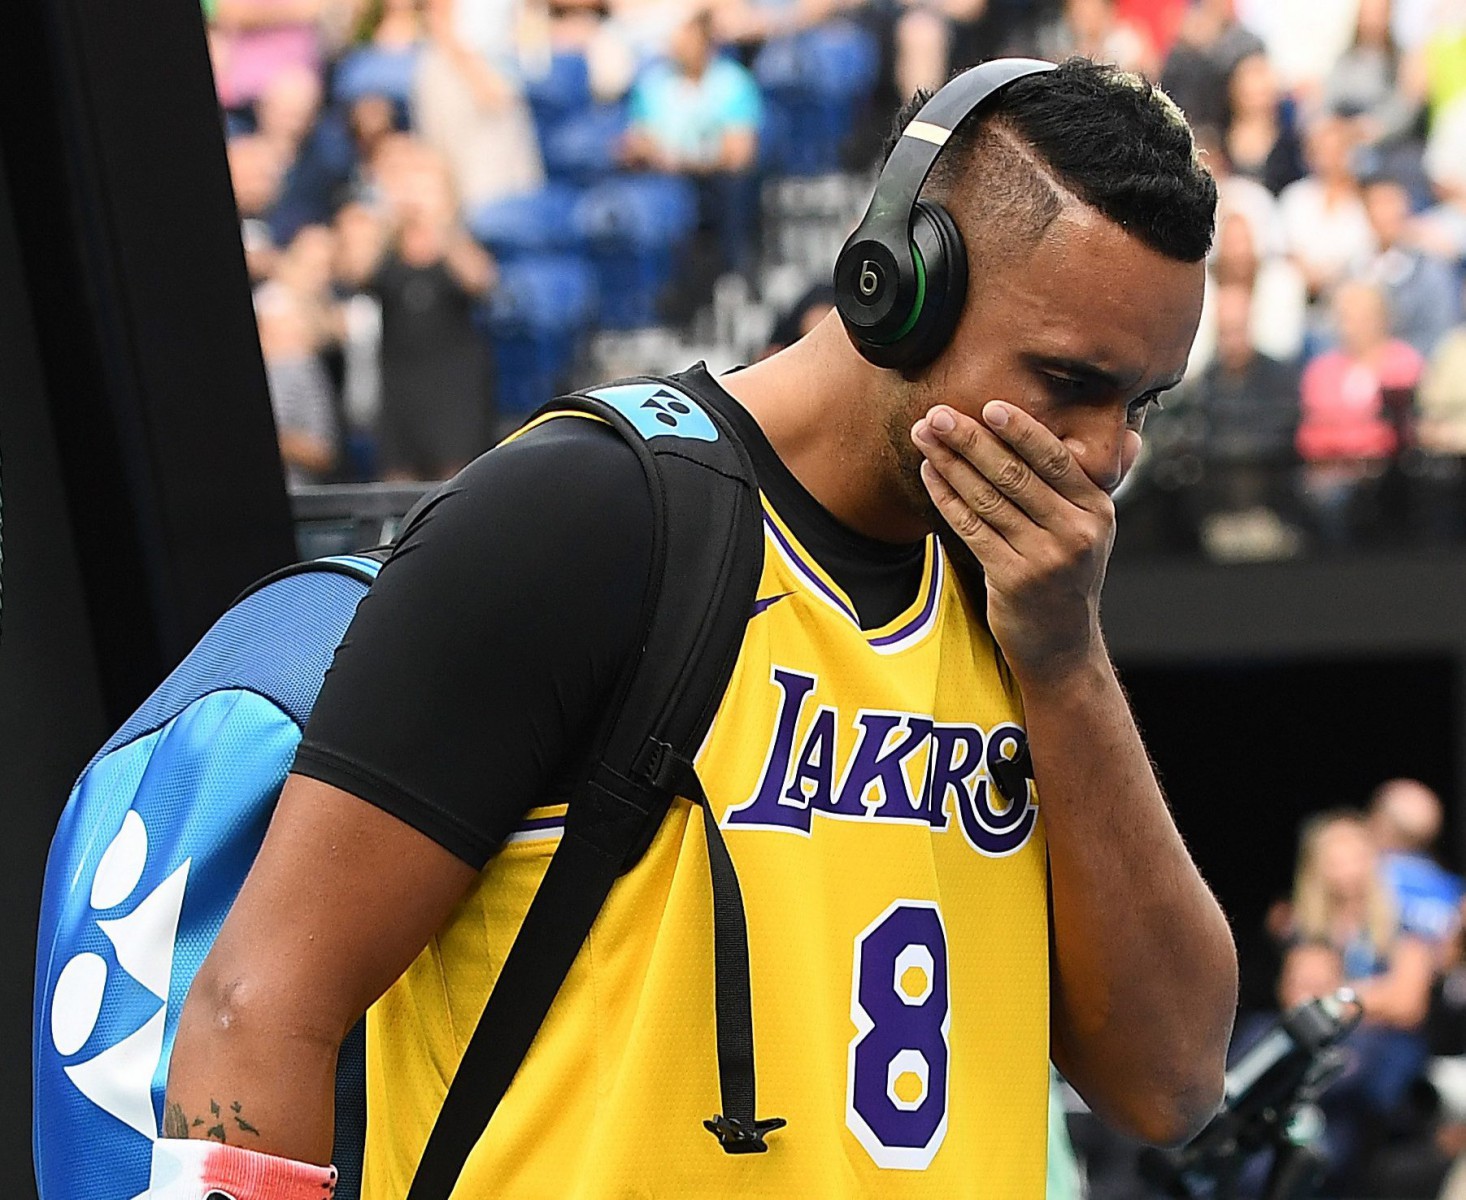 Kyrgios came out on to court wearing a Kobe Bryant LA Lakers jersey in tribute to the NBA legend who died on Sunday